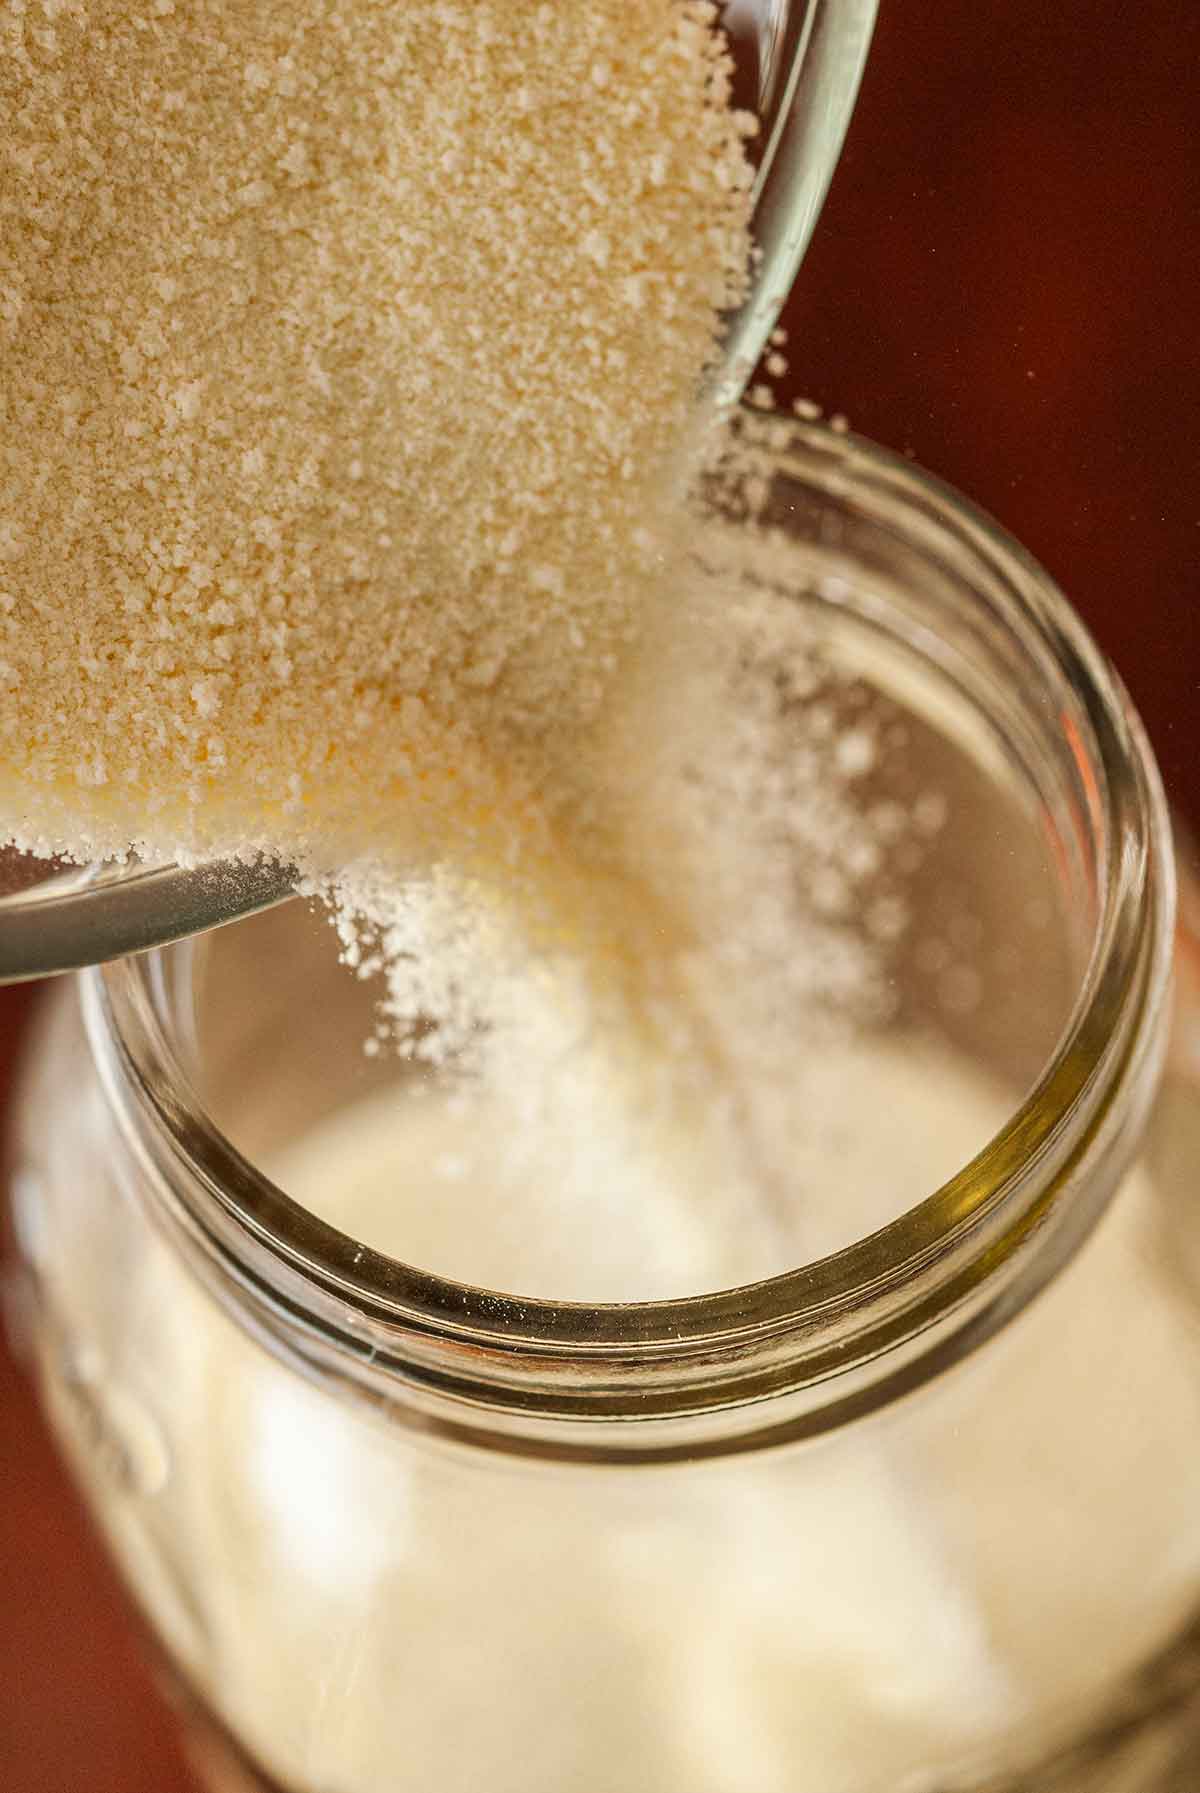 Powdered milk pouring into a jar.